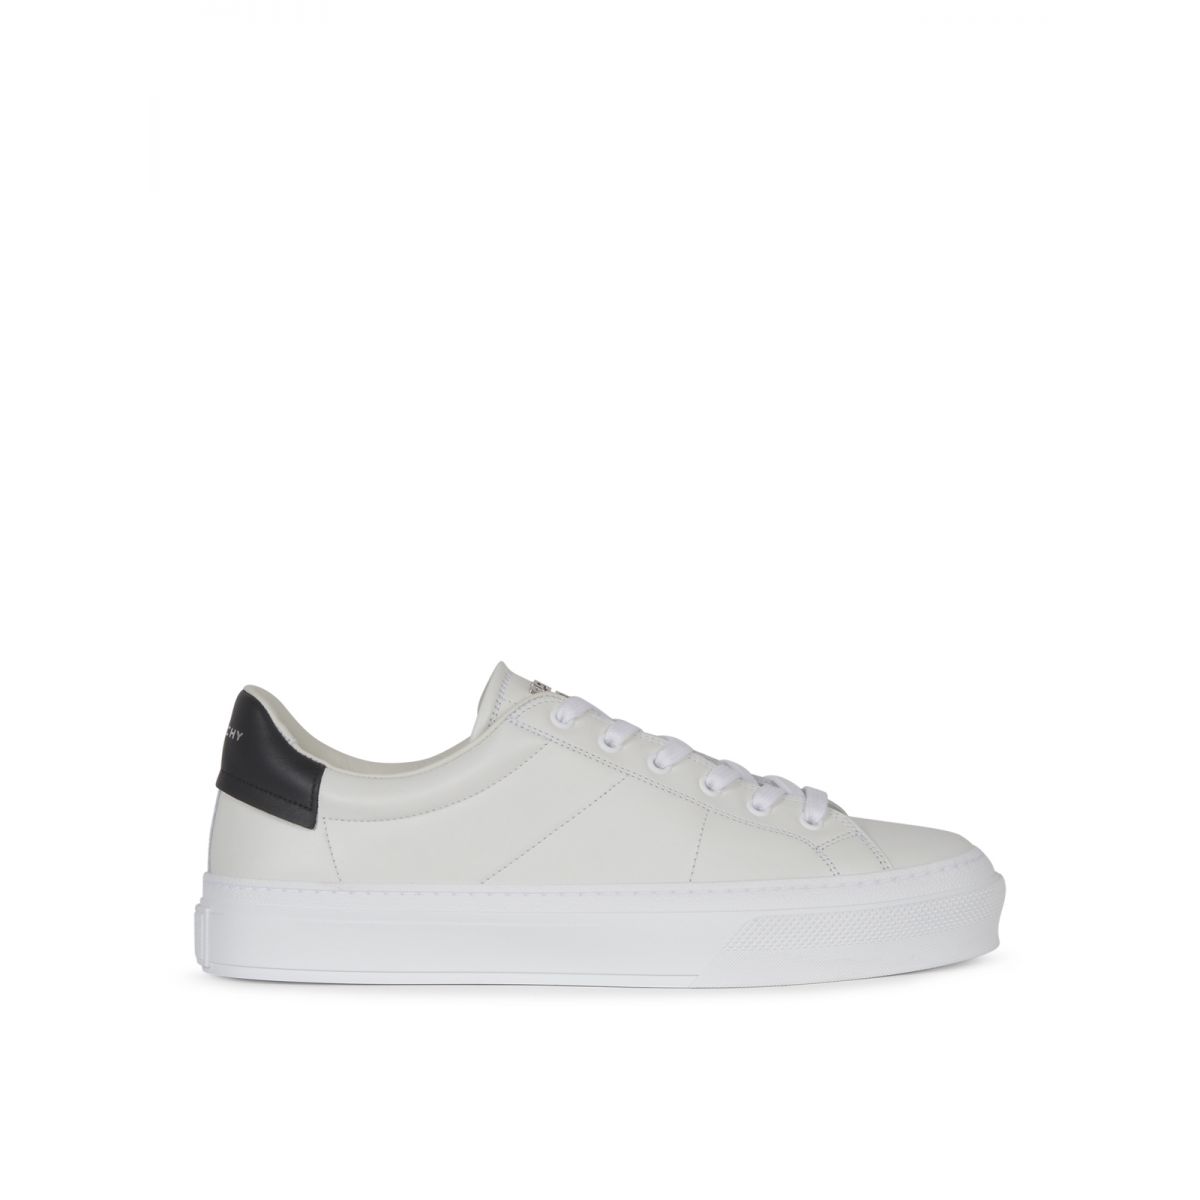 GIVENCHY - Sneakers Ciity sport in smooth calfskin leather.